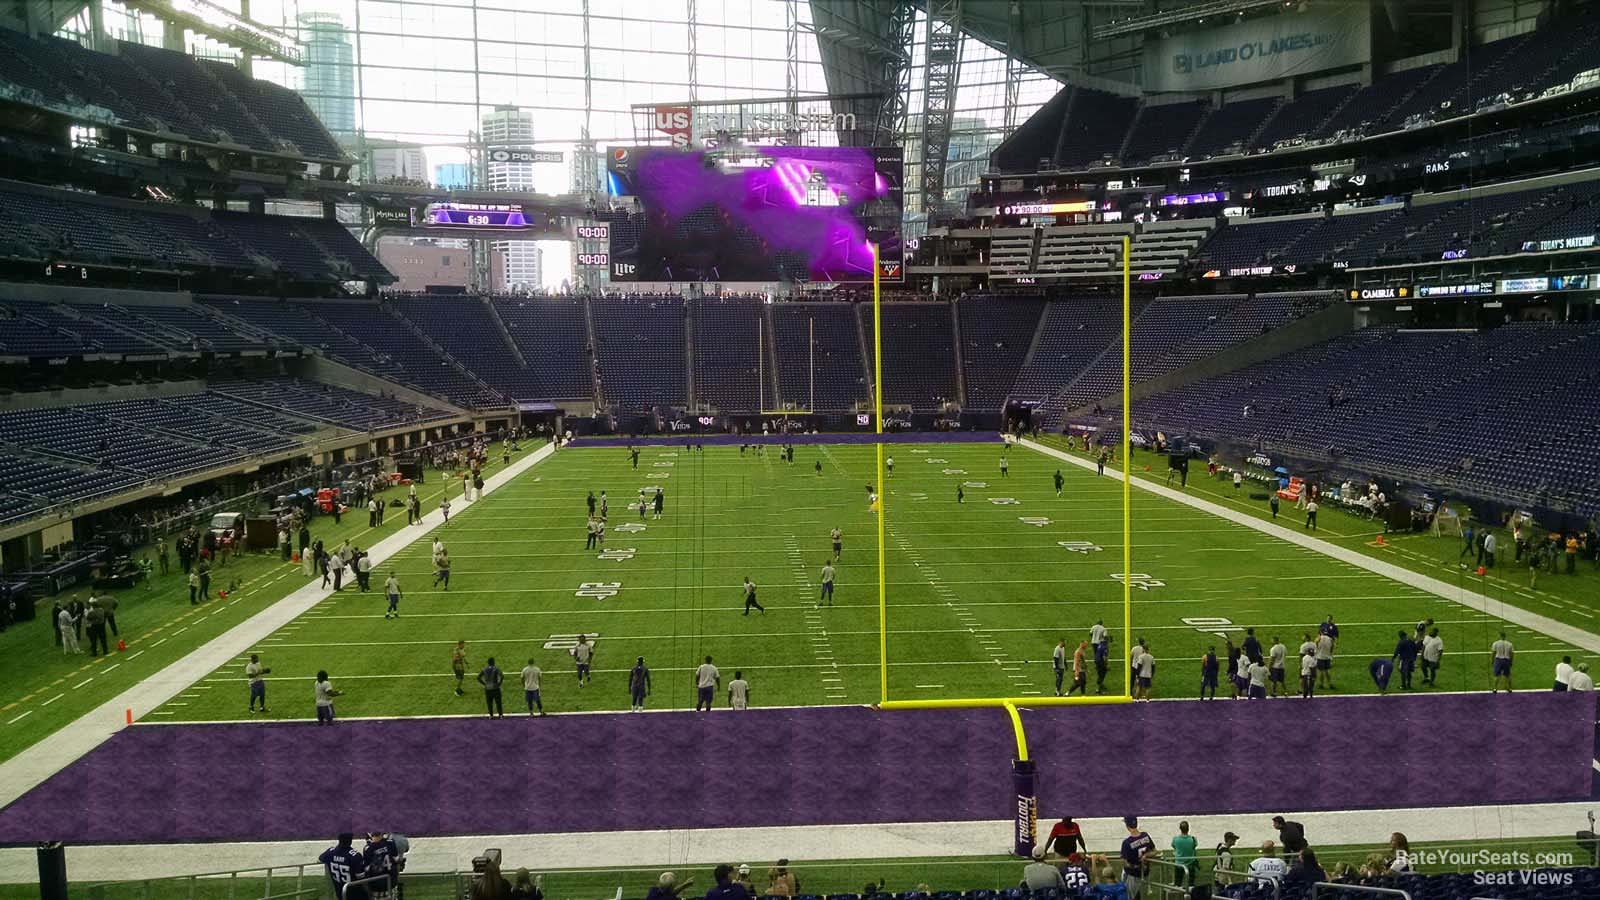 section 120, row 24 seat view  for football - u.s. bank stadium